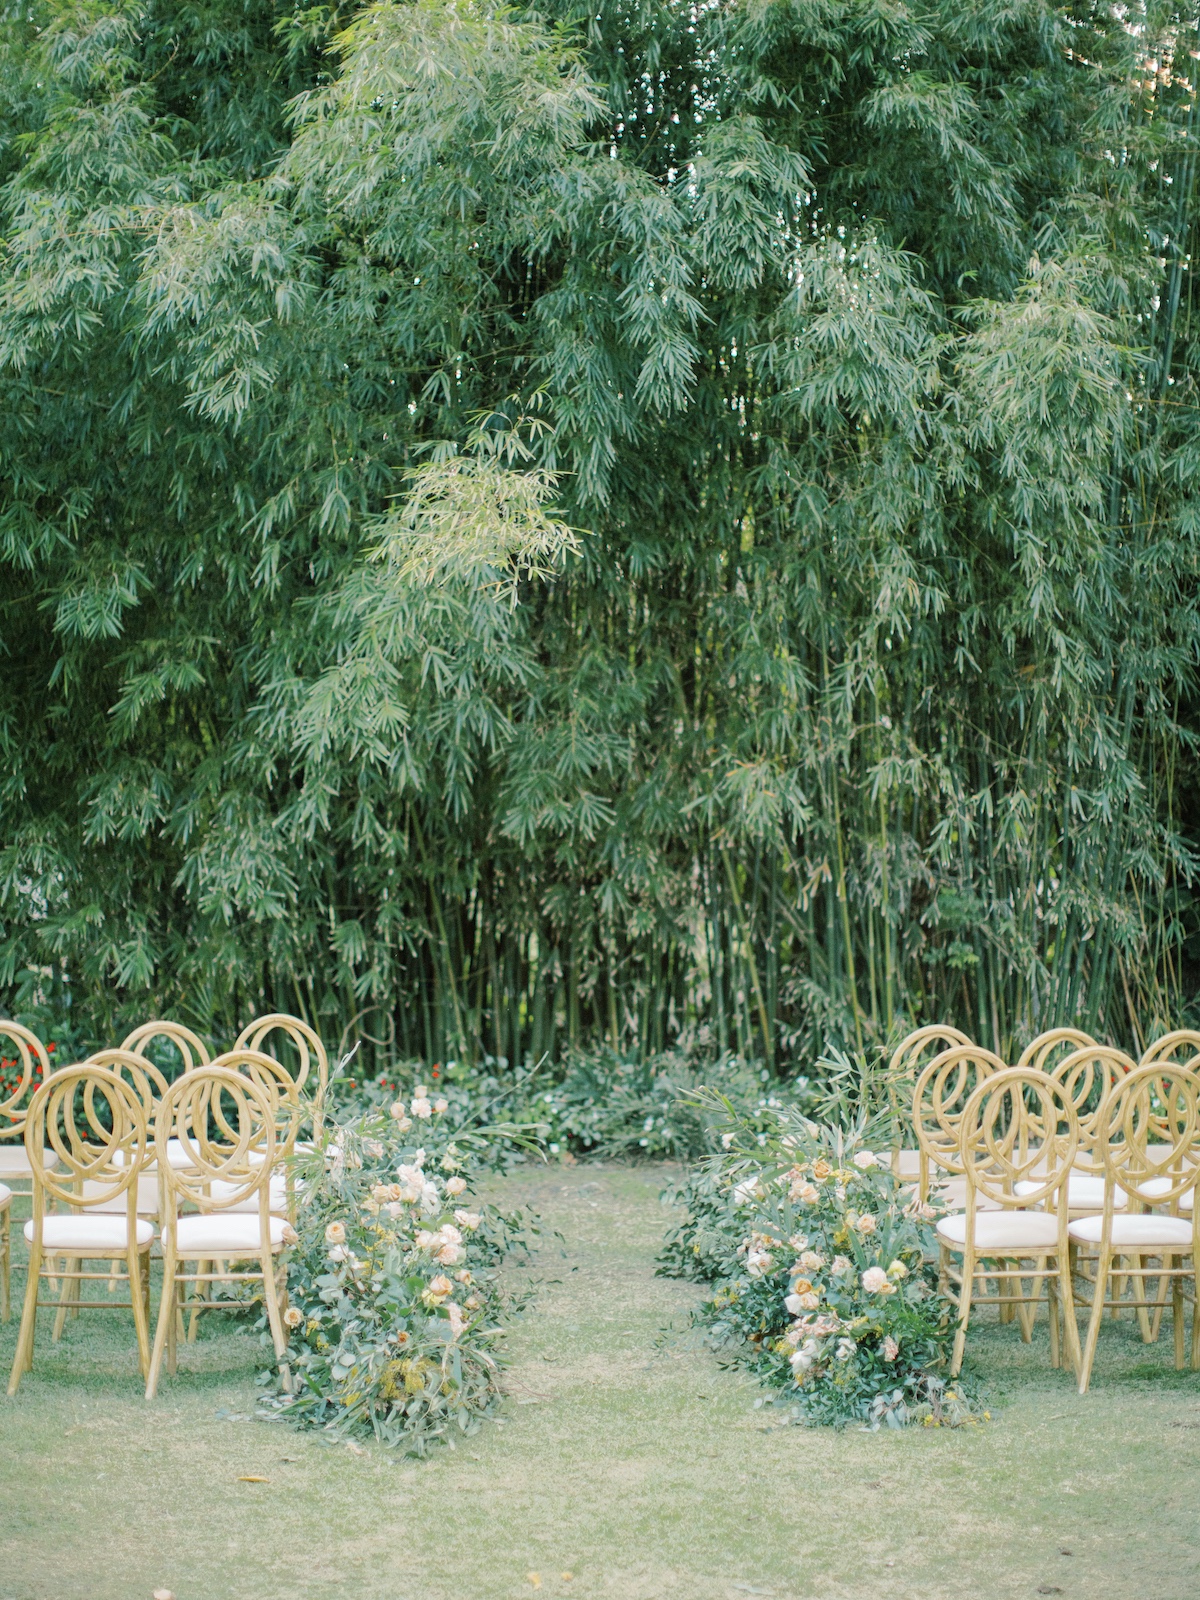 wedding ceremony in front of a forest of bamboo